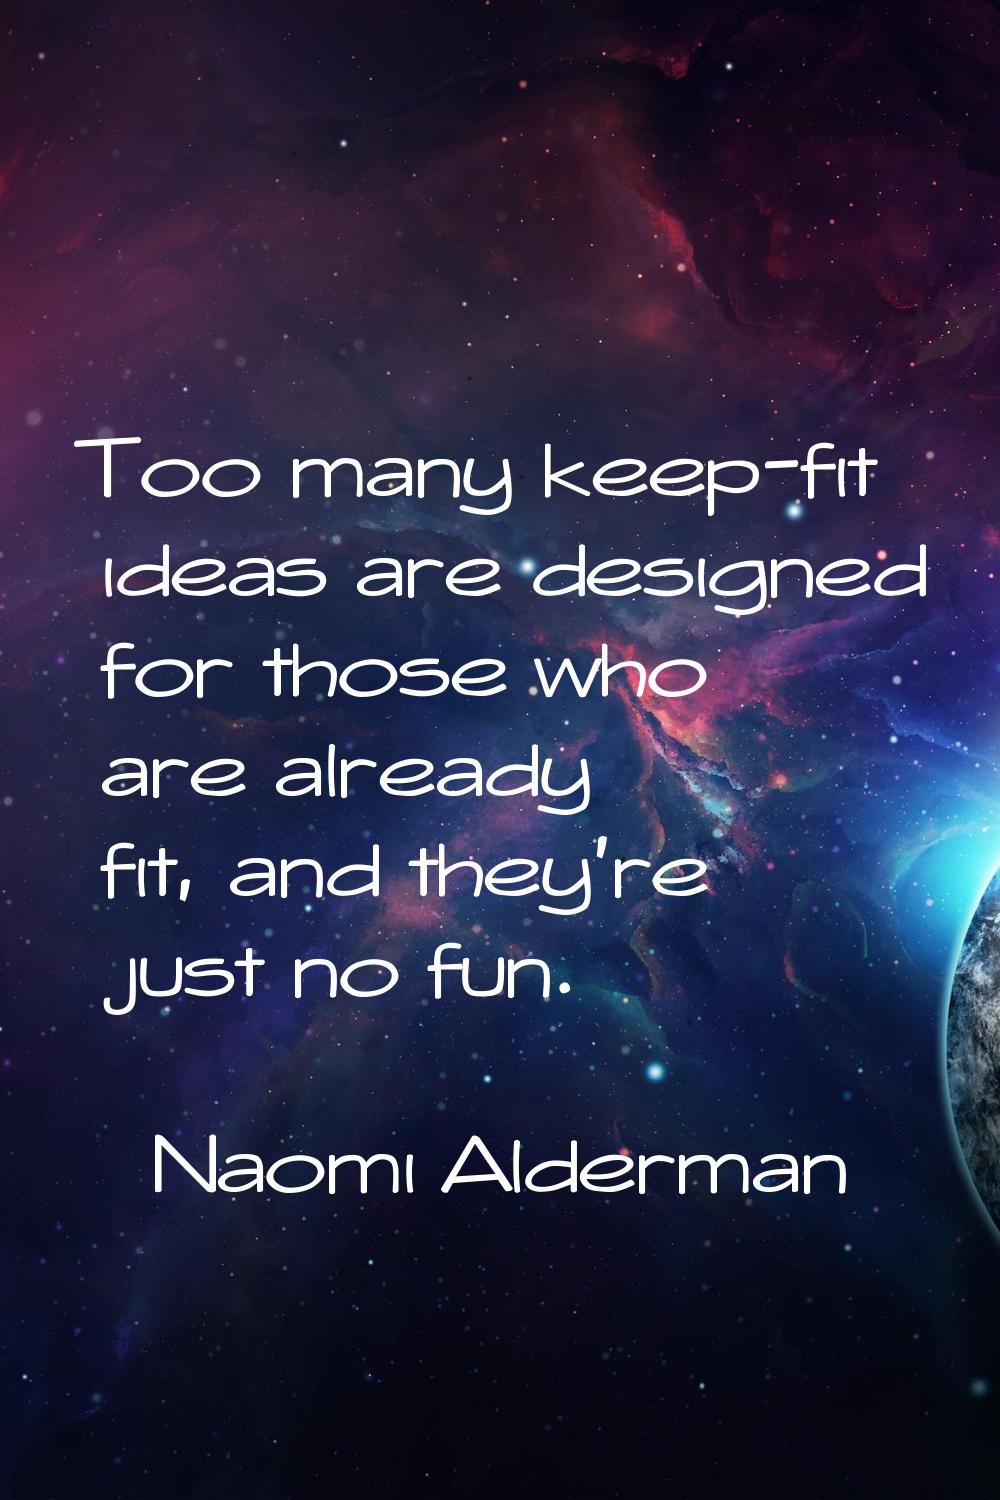 Too many keep-fit ideas are designed for those who are already fit, and they're just no fun.